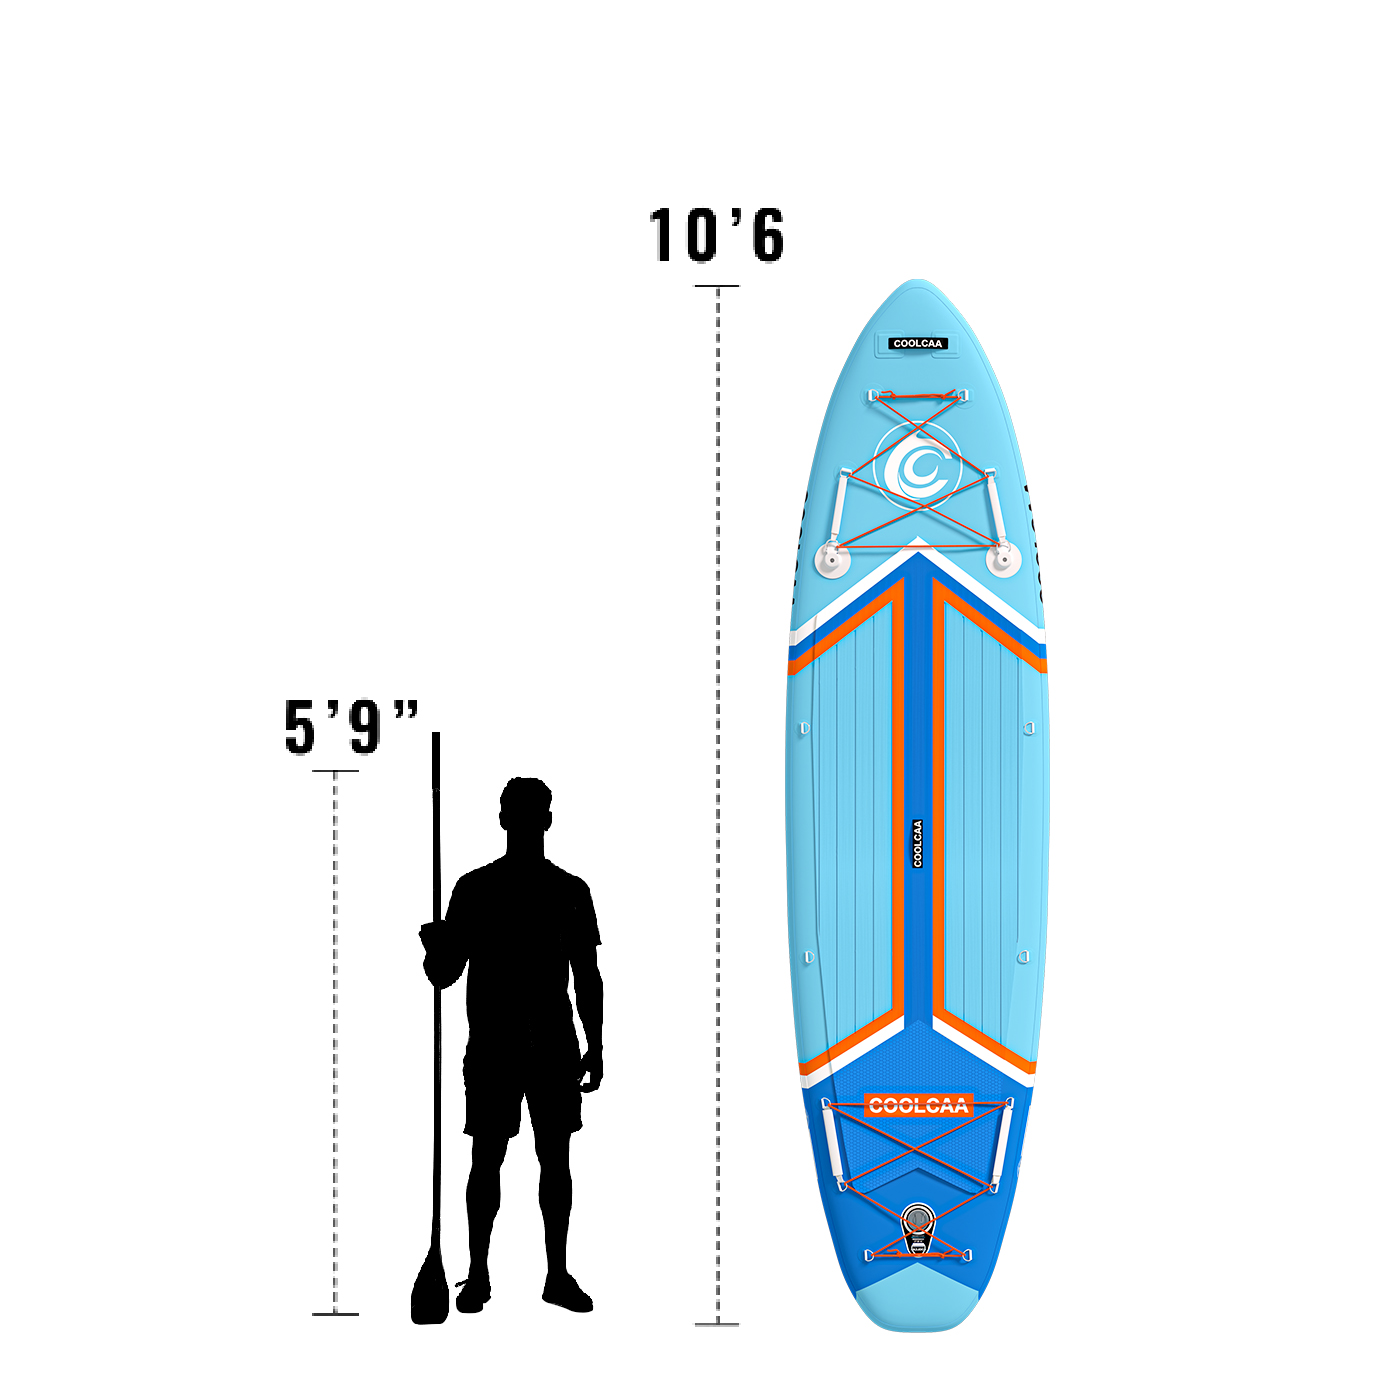 Coolcaa 10’6 Challenger Inflatable Paddle Board Package with Fiberglass Paddle